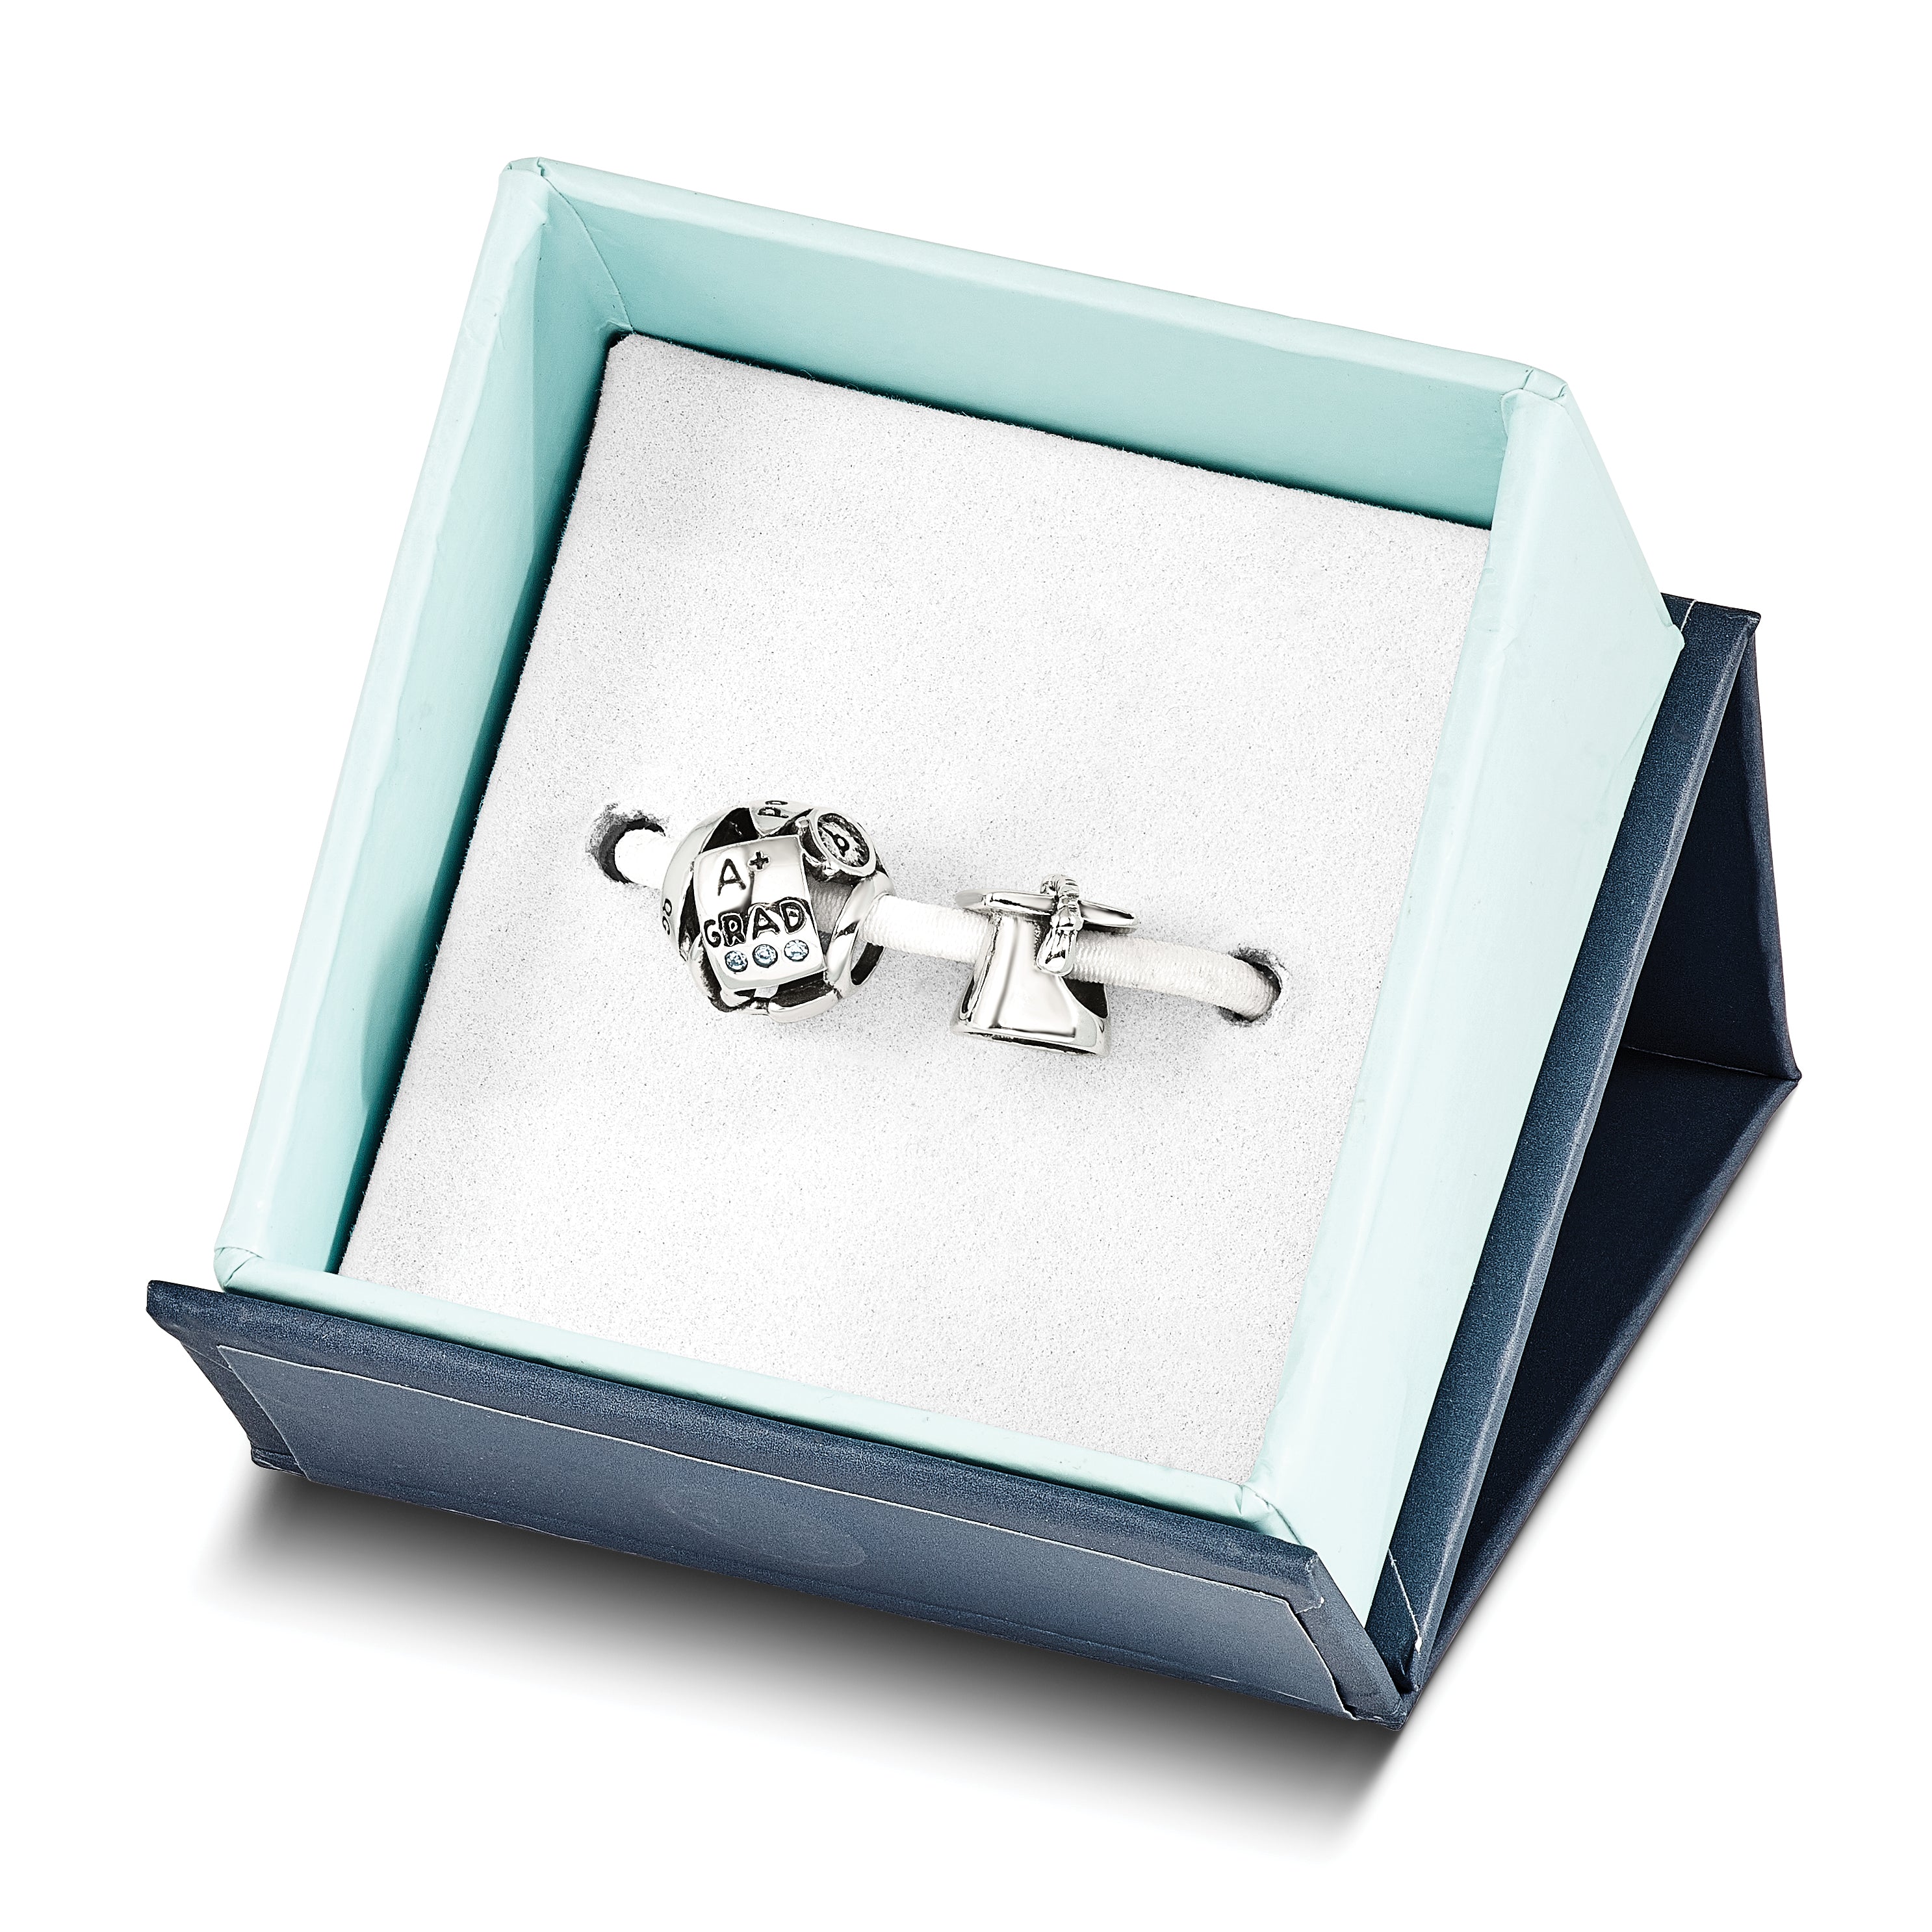 Sterling Silver Reflections Graduation Boxed Bead Set